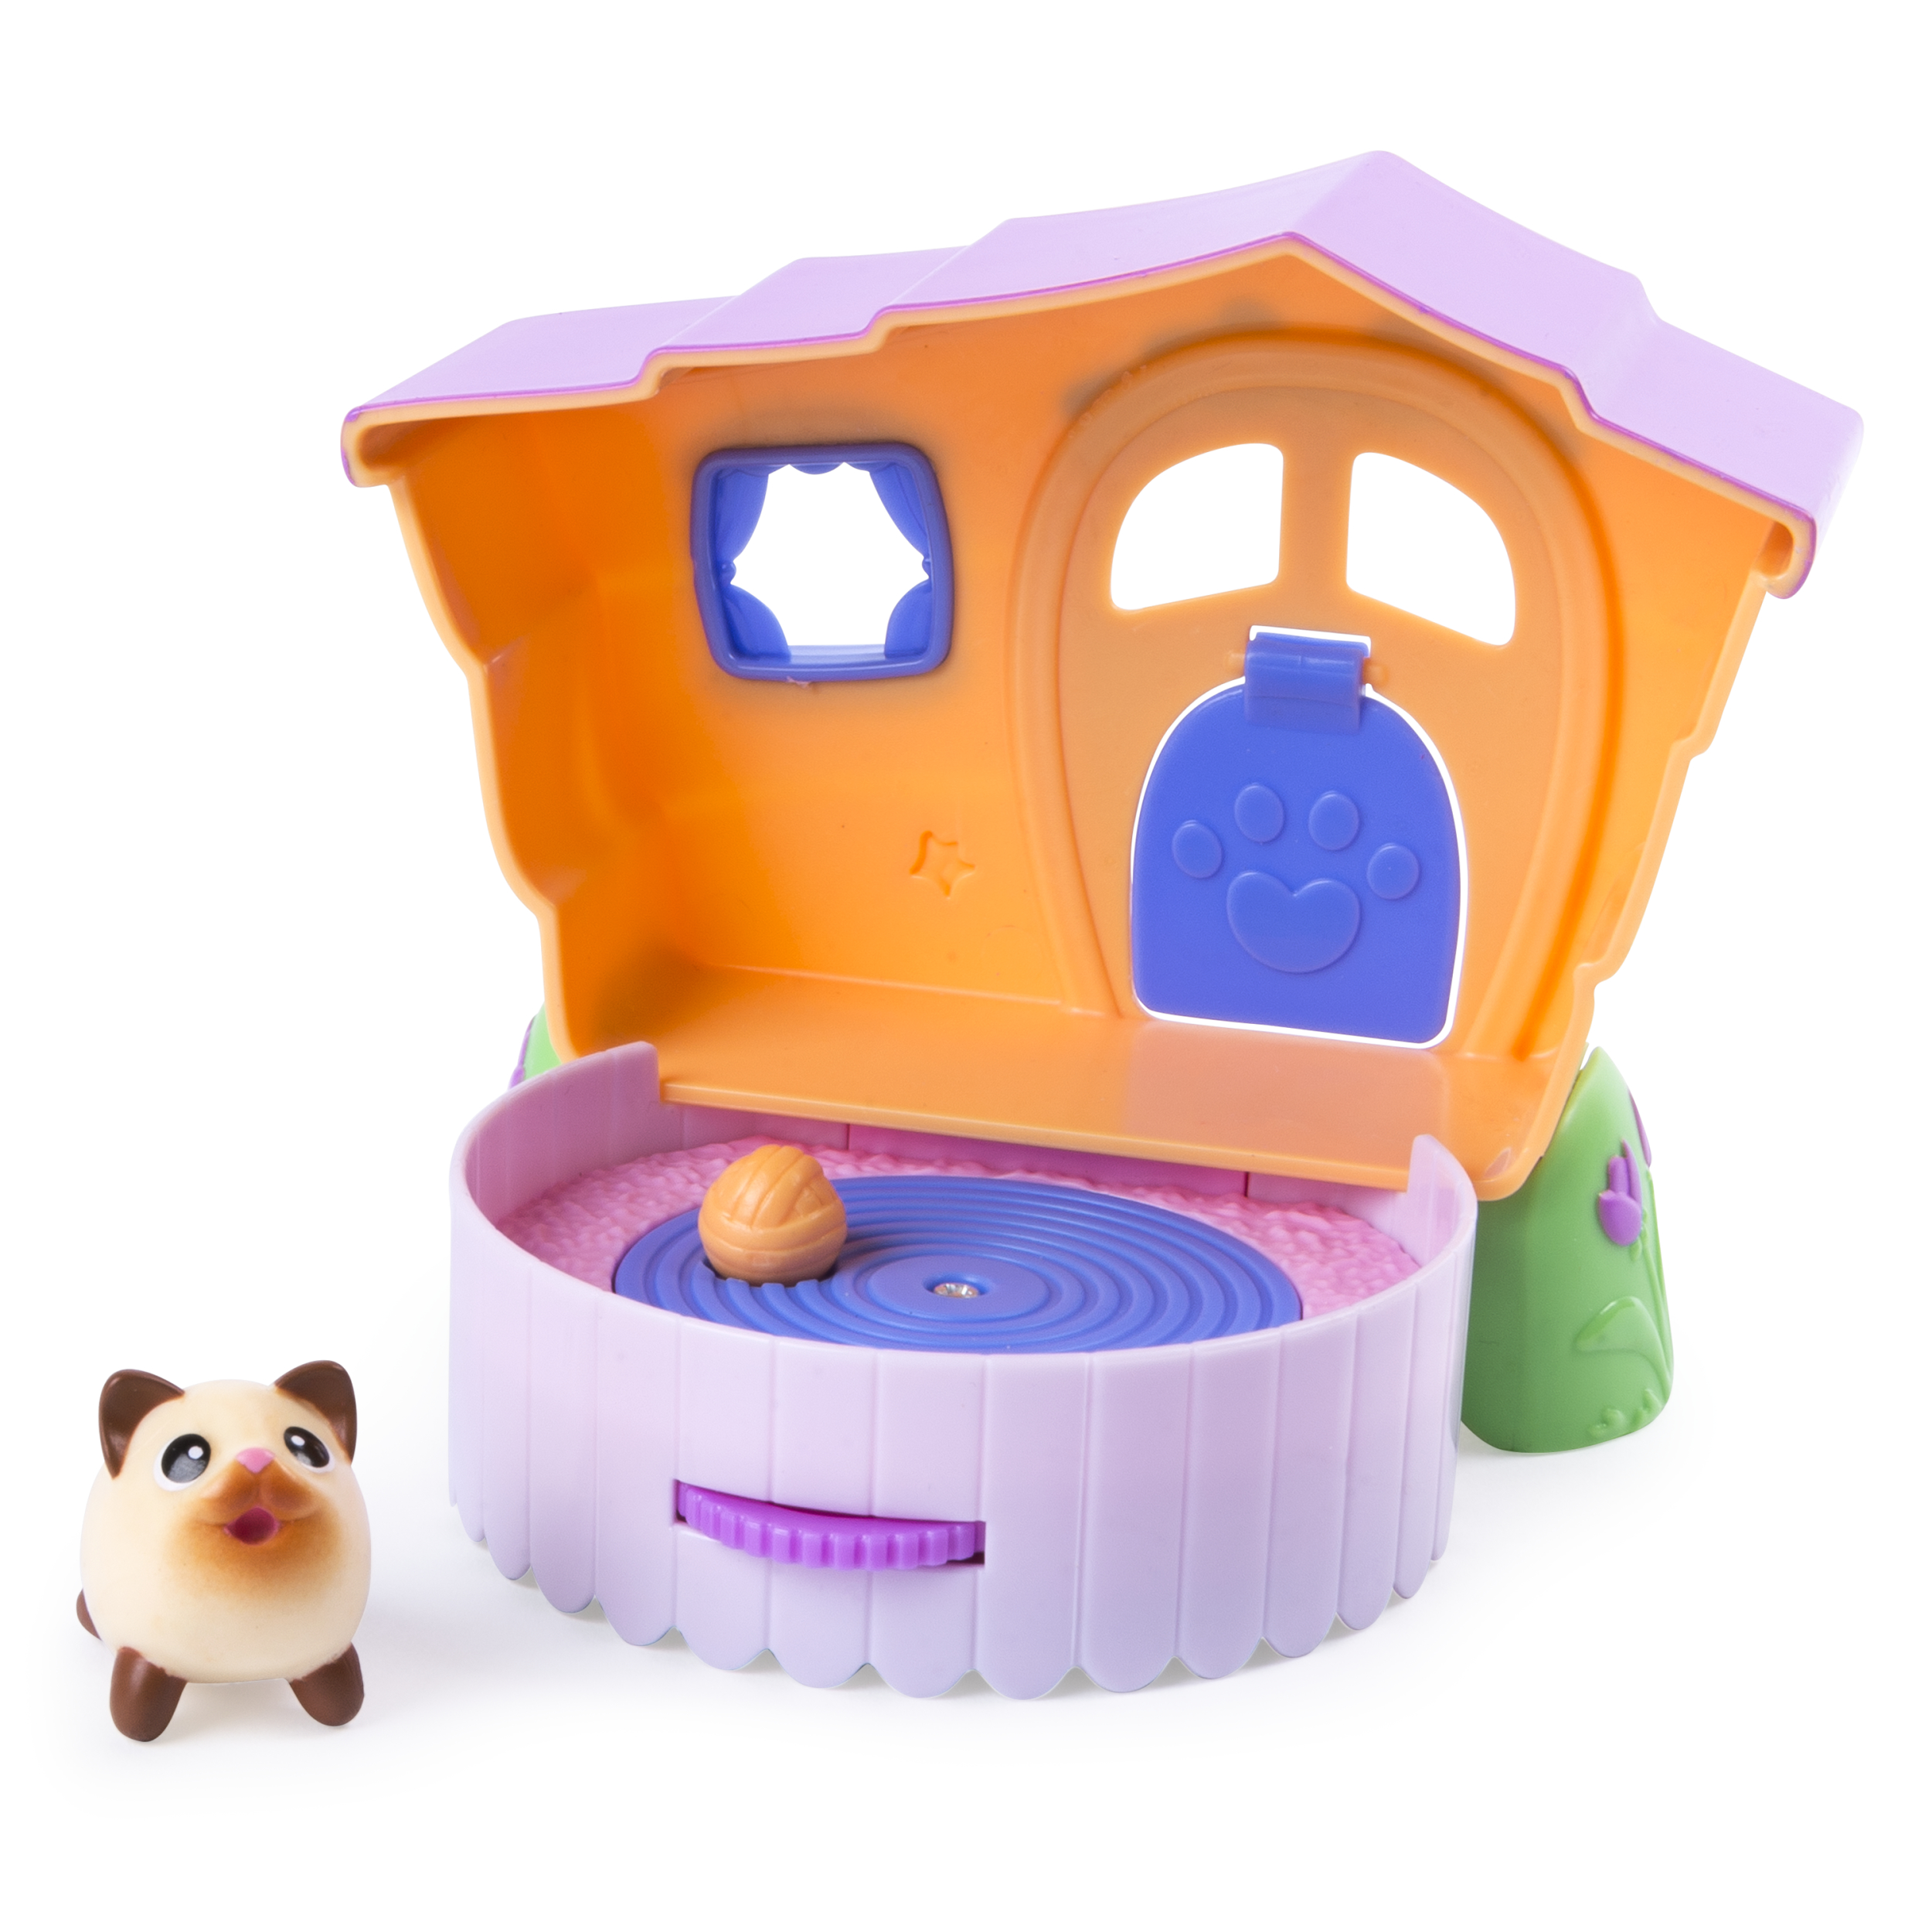 Chubby Puppies & Friends ? 2-in 1 Flip N? Play House Playset with Siamese Kitty Collectible Figure - image 3 of 6